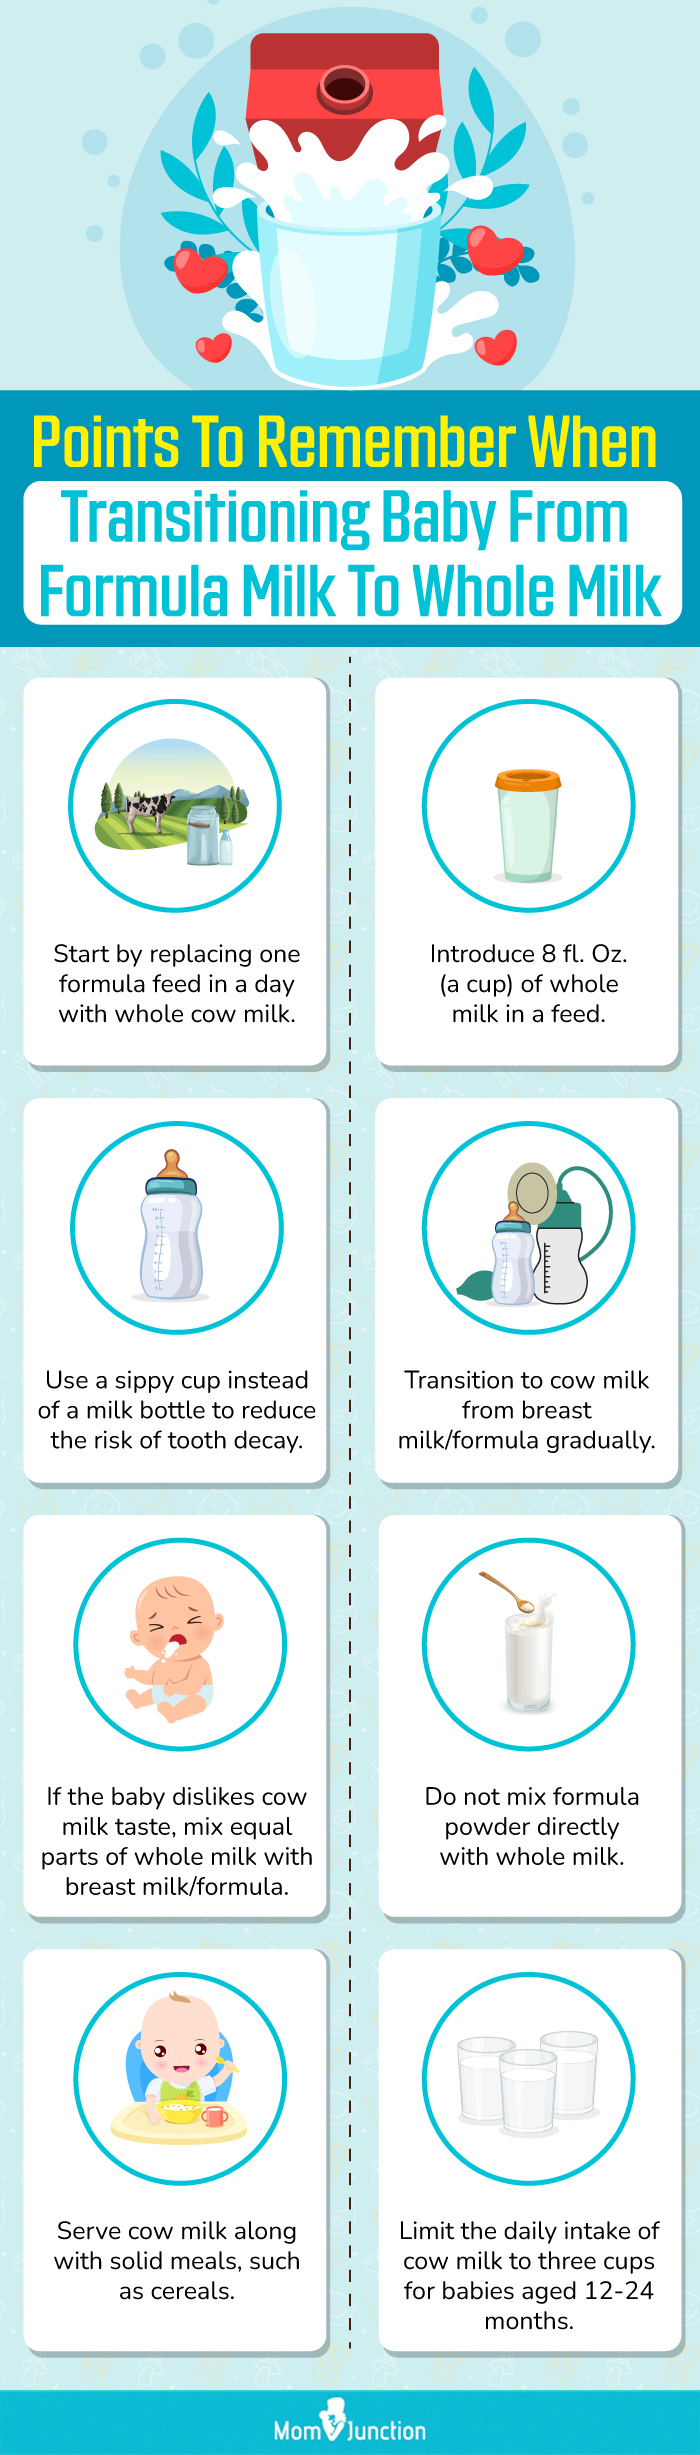 points to remember when transitioning baby from formula milk to whole milk (infographic)